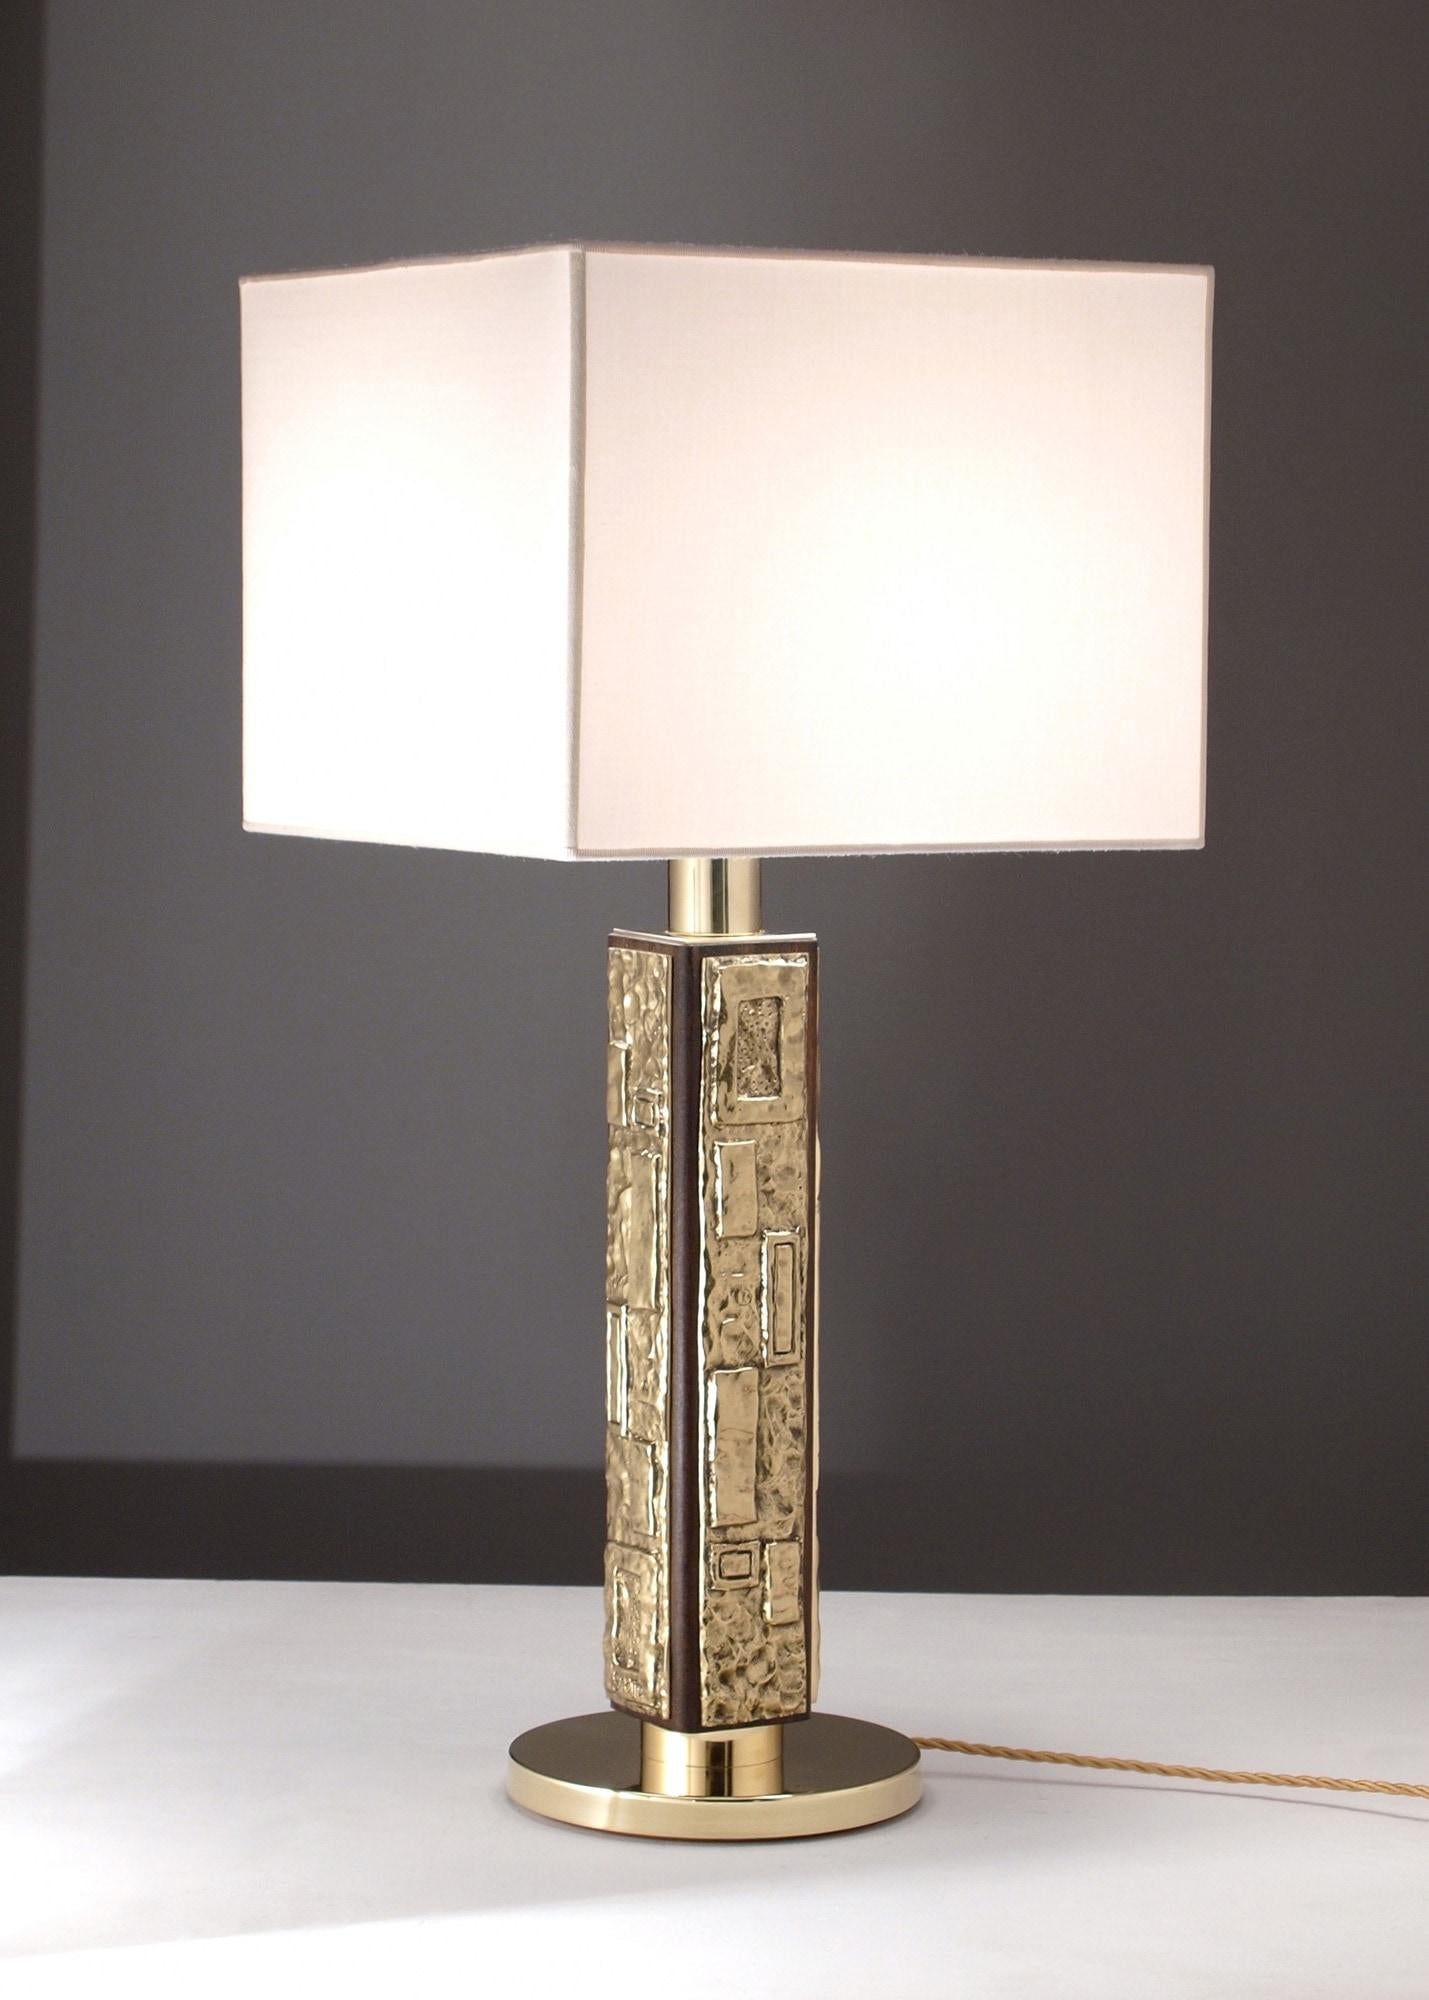 Lamp with base in brass or brass fusion, frame in black lacquered wood or walnut essence, with particular decorative bands in artistic fusion decorated and signed by the designer. Circular lampshade in ivory colored shantung. Contact us for custom